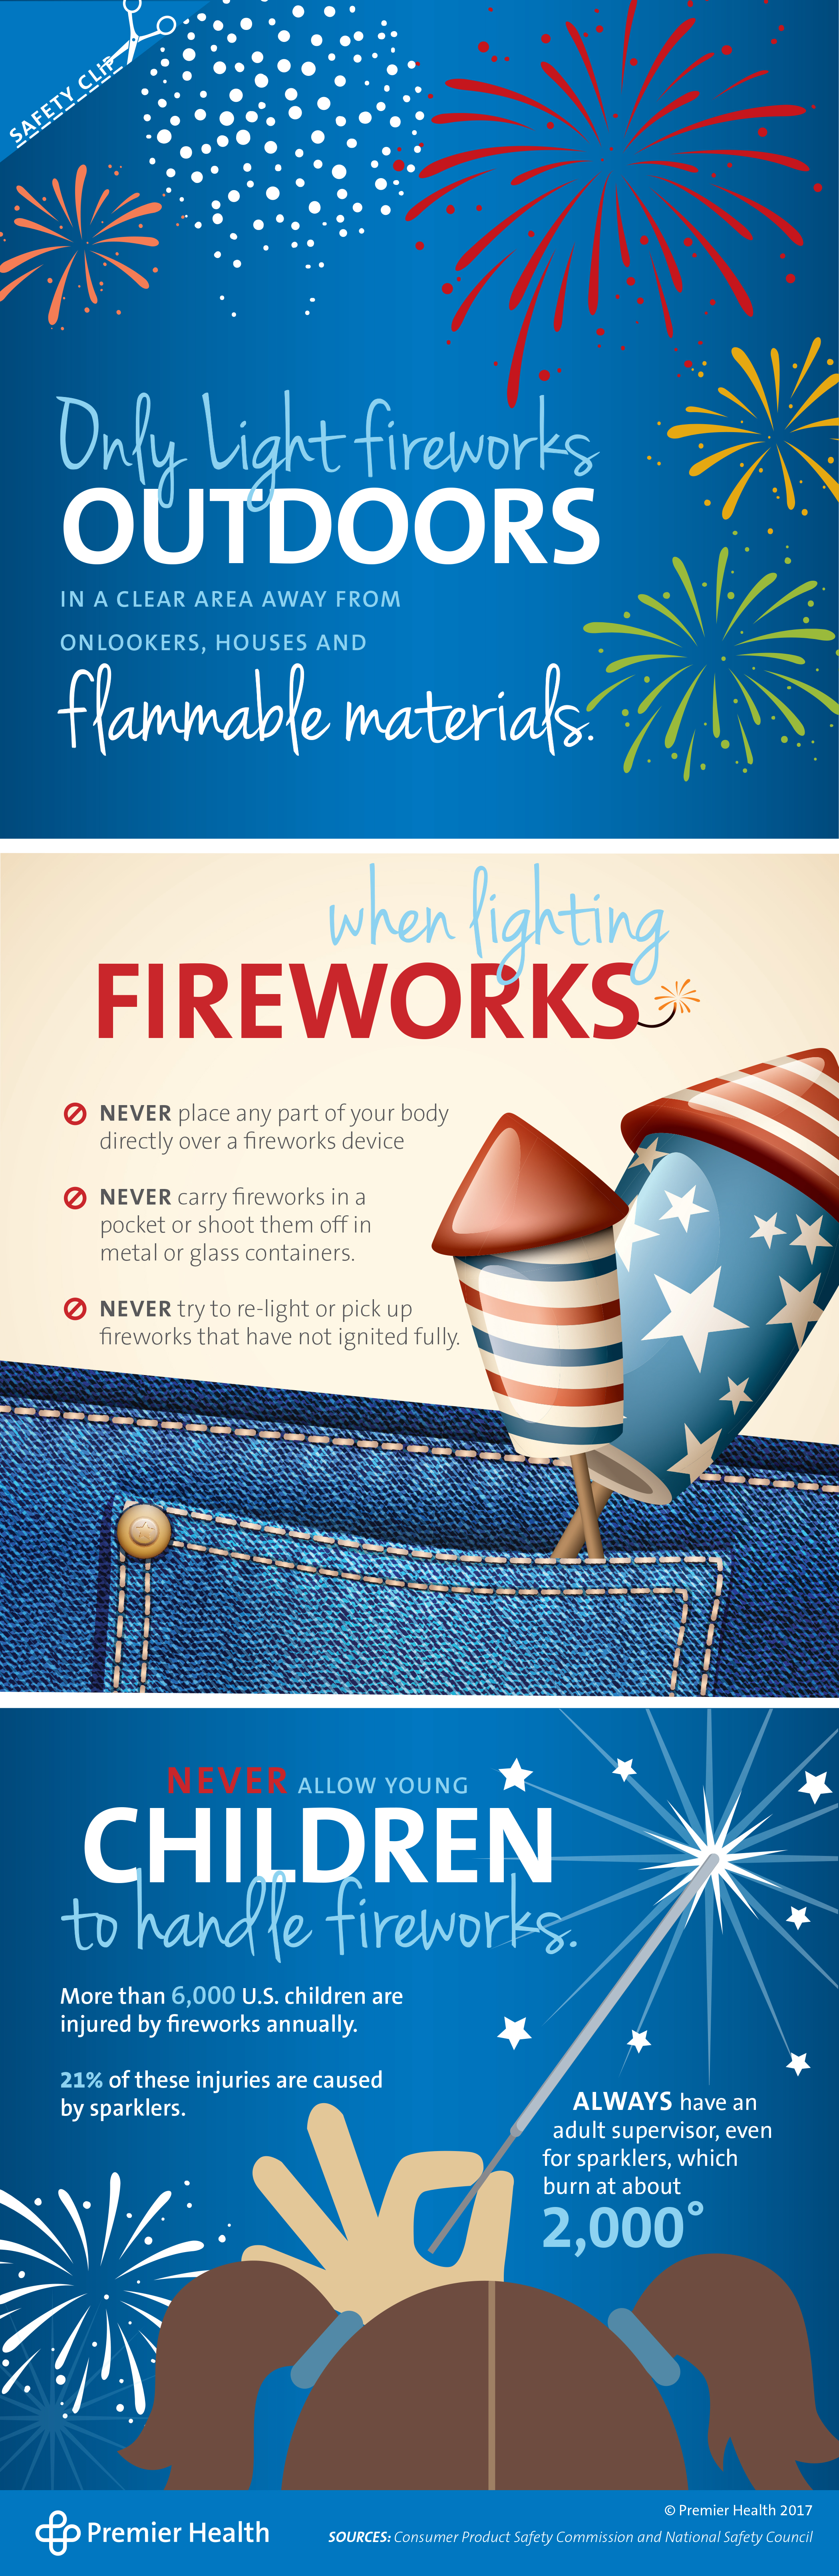 Fireworks Safety Infographic